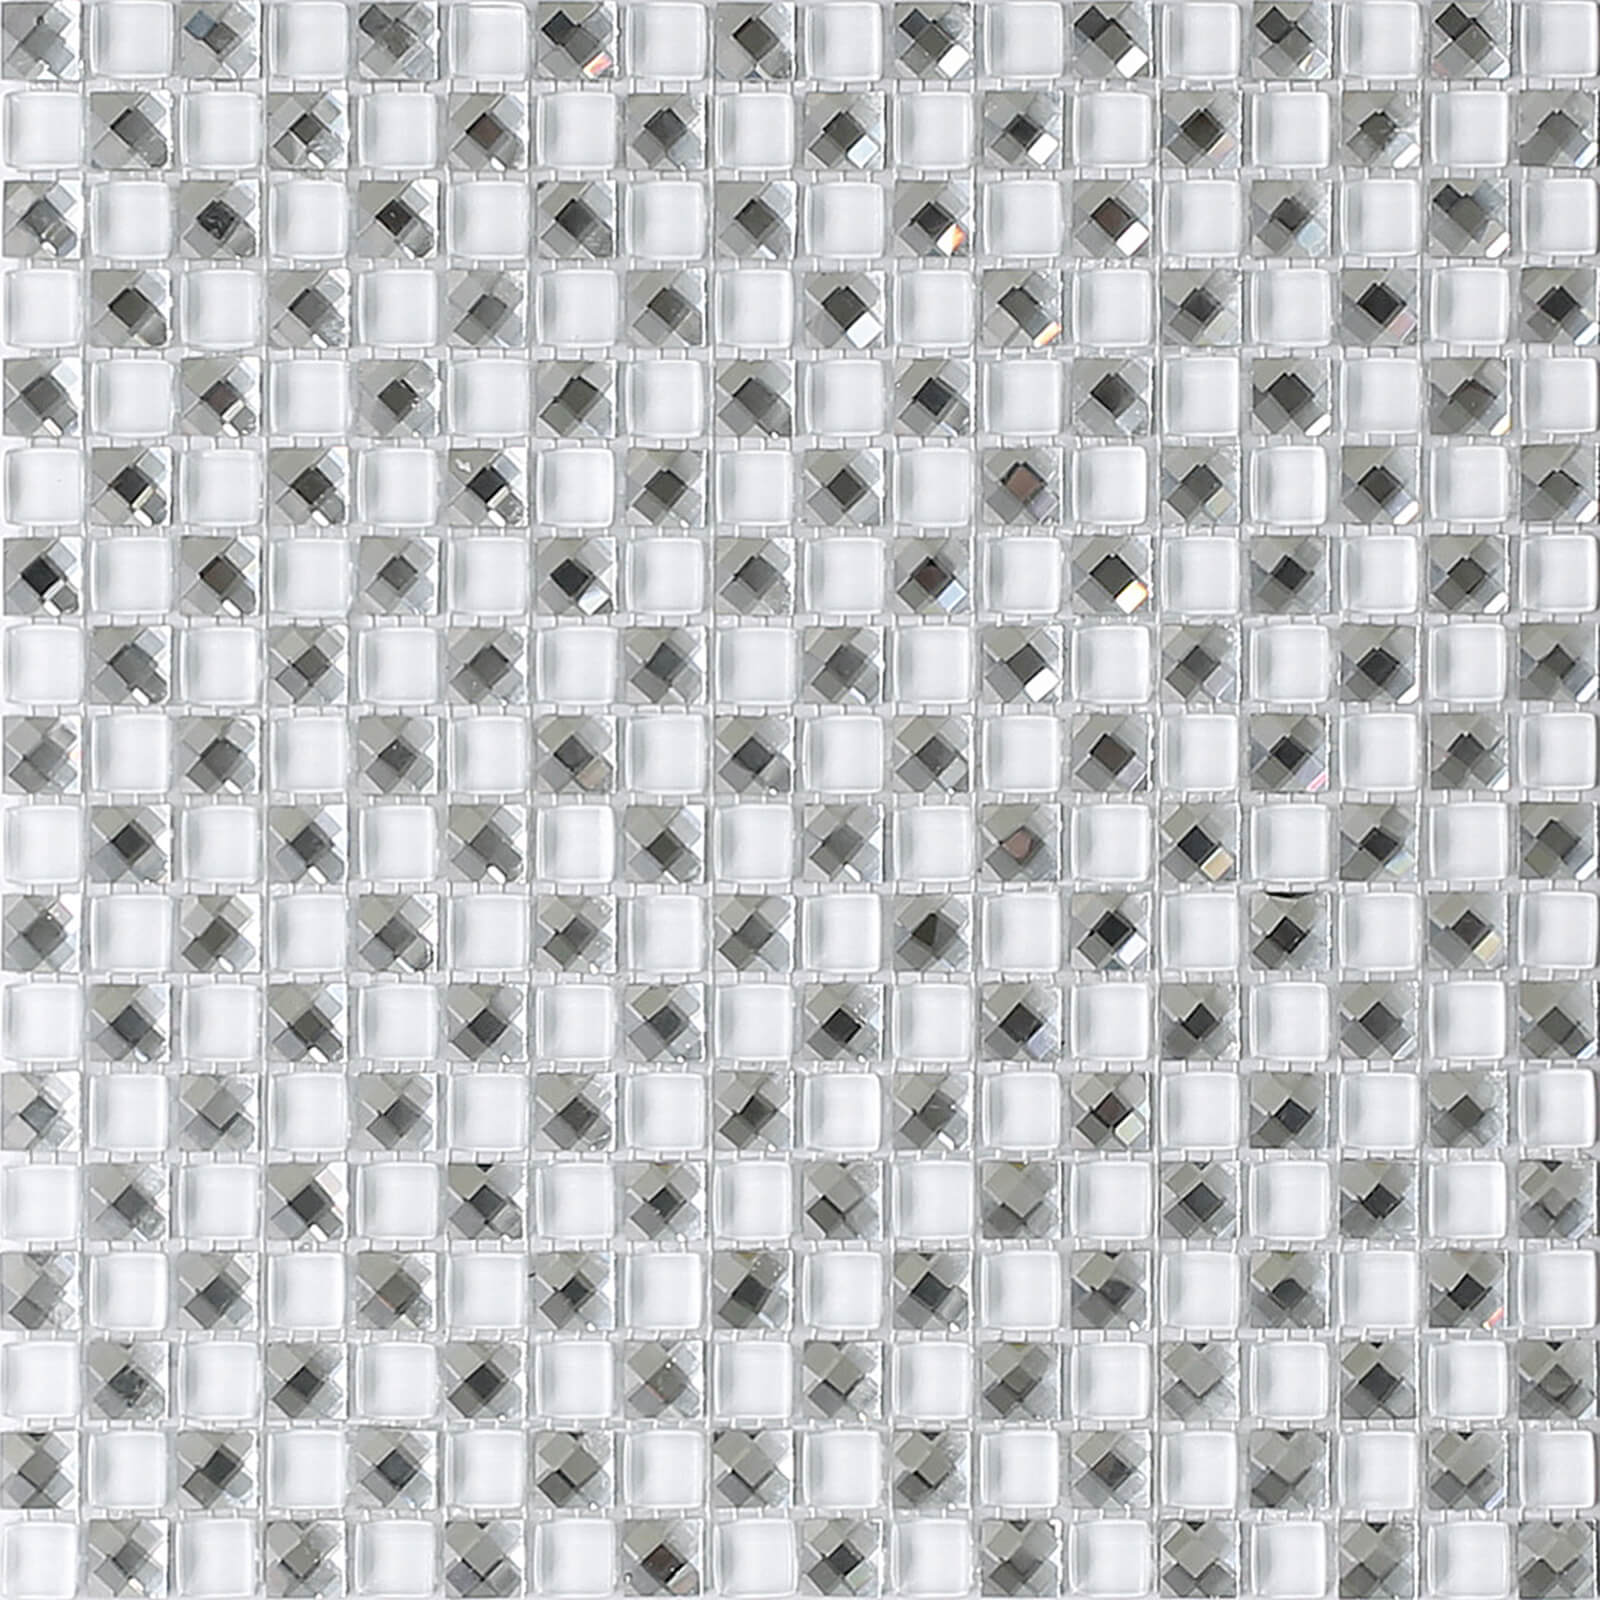 House of Mosaics White Jewel Mosaic Tile (Sample Only) - 150 x 110mm